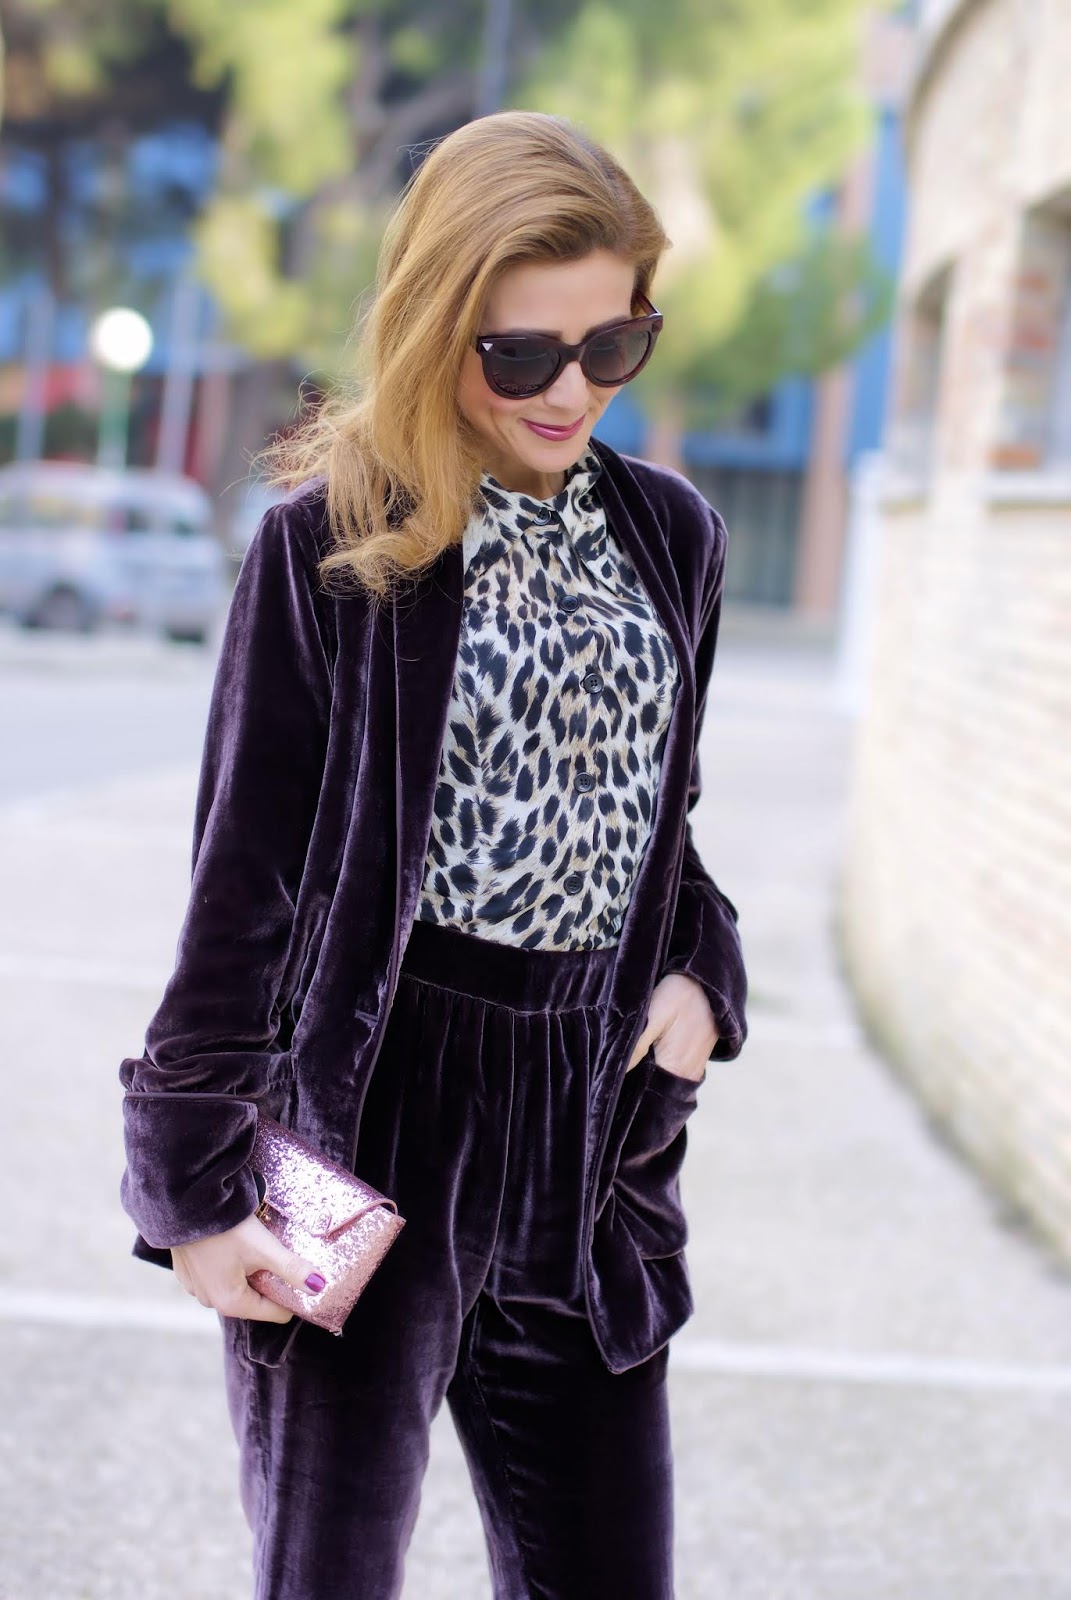 Velvet burgundy suit: a chic outfit idea from 1.2.3 Paris on Fashion and Cookies fashion, fashion blogger style